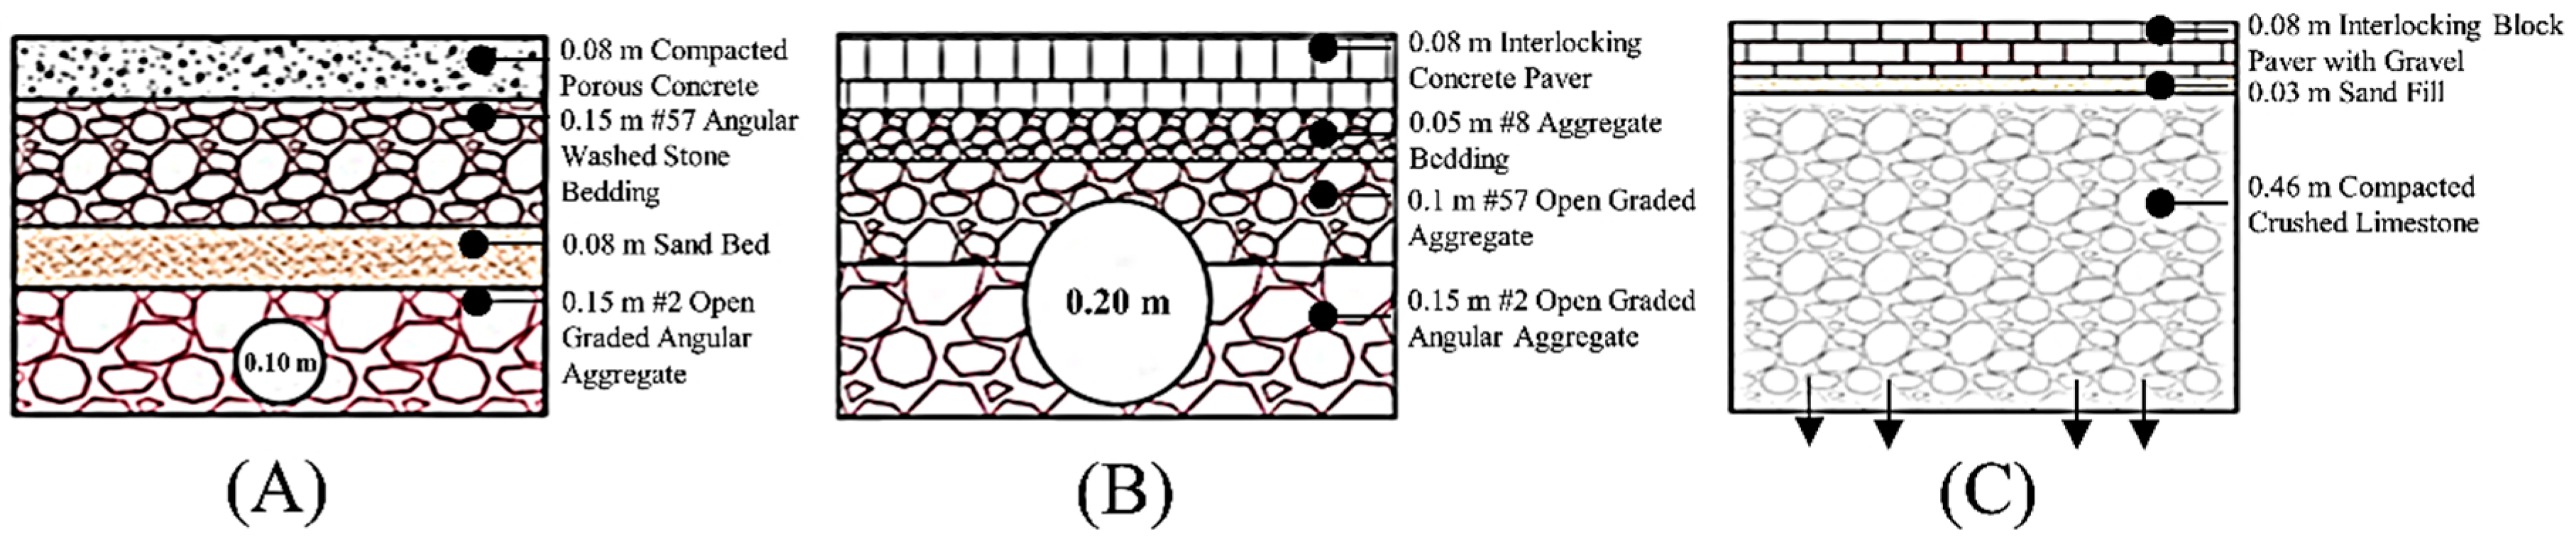 Water | Free Full-Text | A Comparison of Three Types of Permeable Pavements  for Urban Runoff Mitigation in the Semi-Arid South Texas, U.S.A